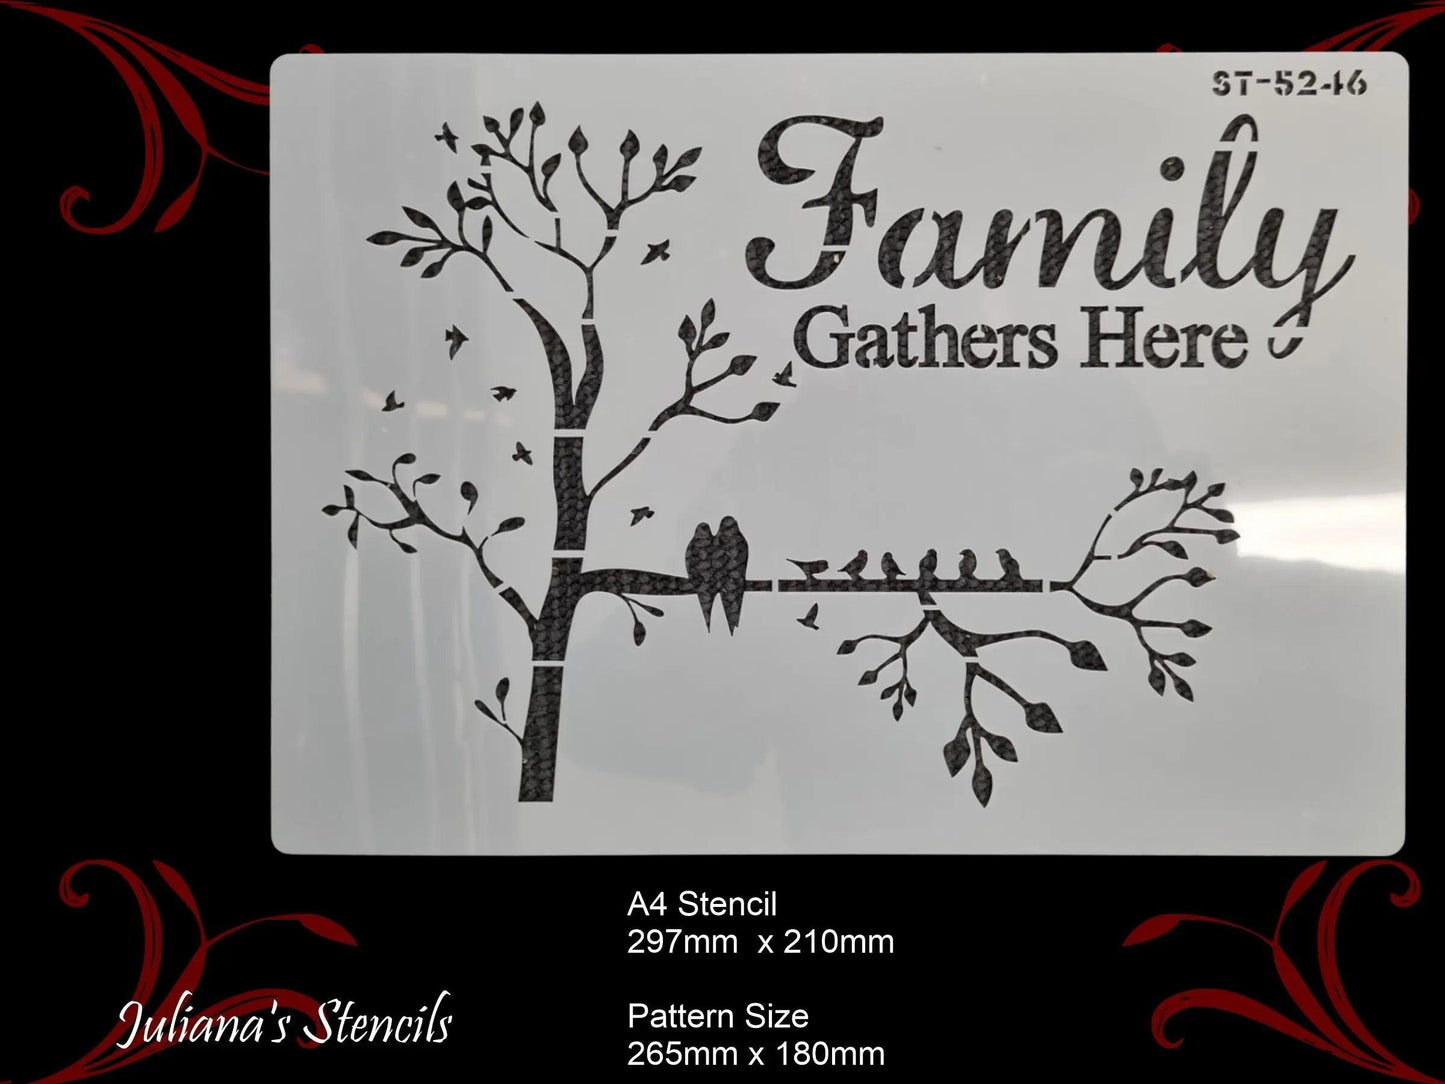 FAMILY GATHERS HERE furniture and wall Paint Stencil - Vintique Concepts